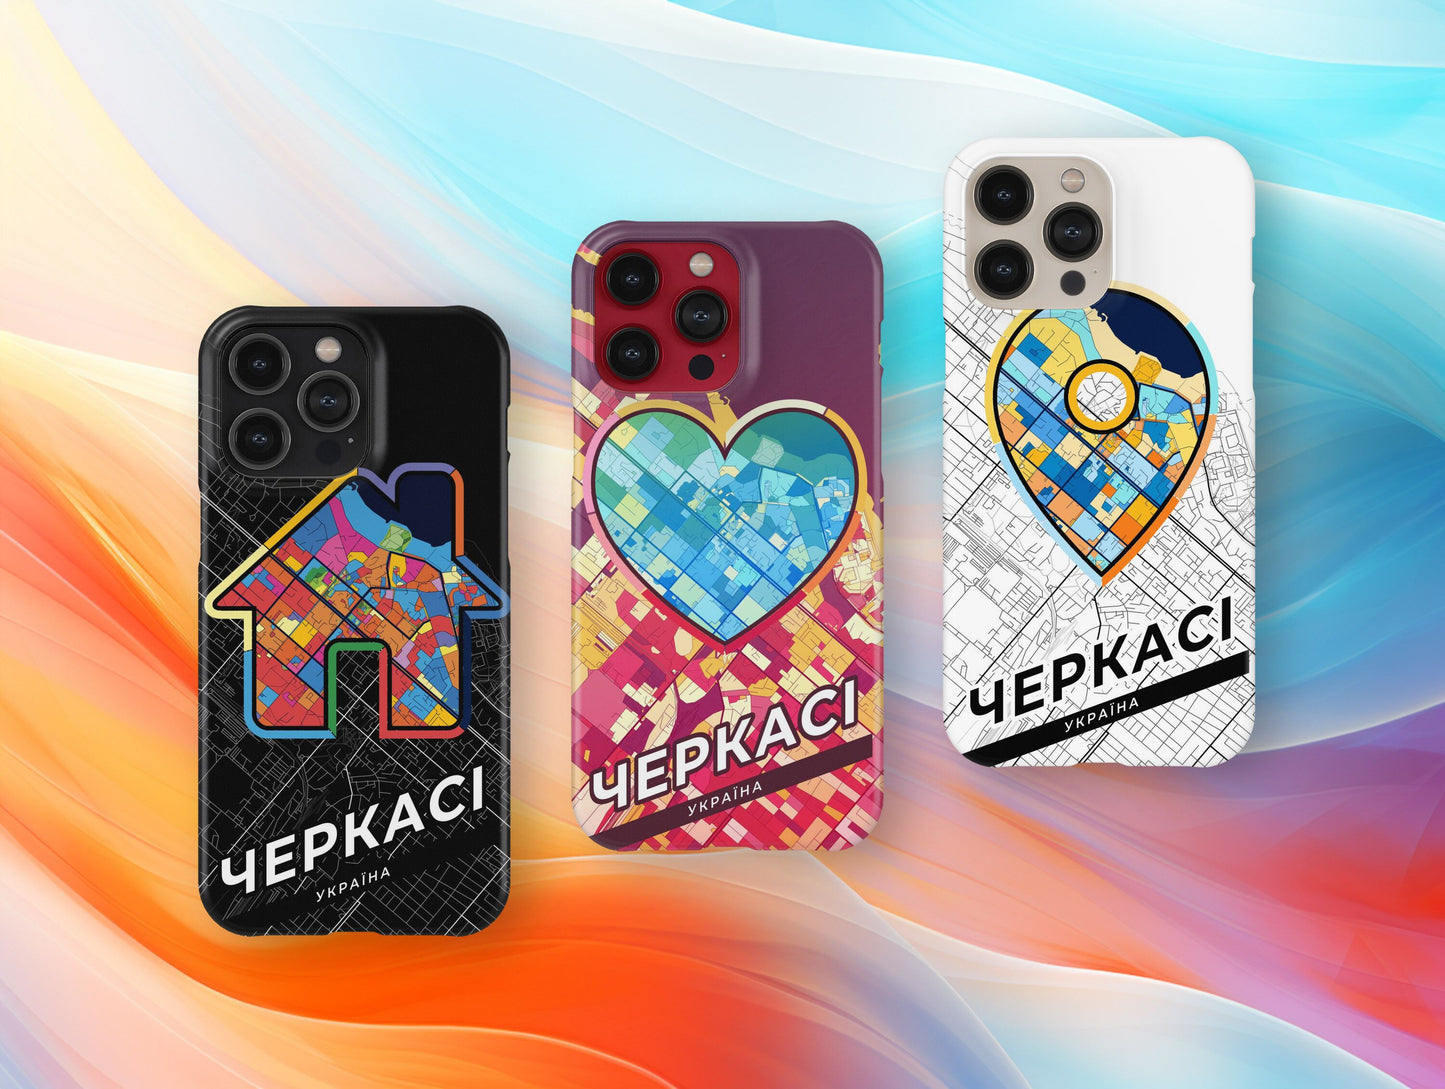 Cherkasy Ukraine slim phone case with colorful icon. Birthday, wedding or housewarming gift. Couple match cases.